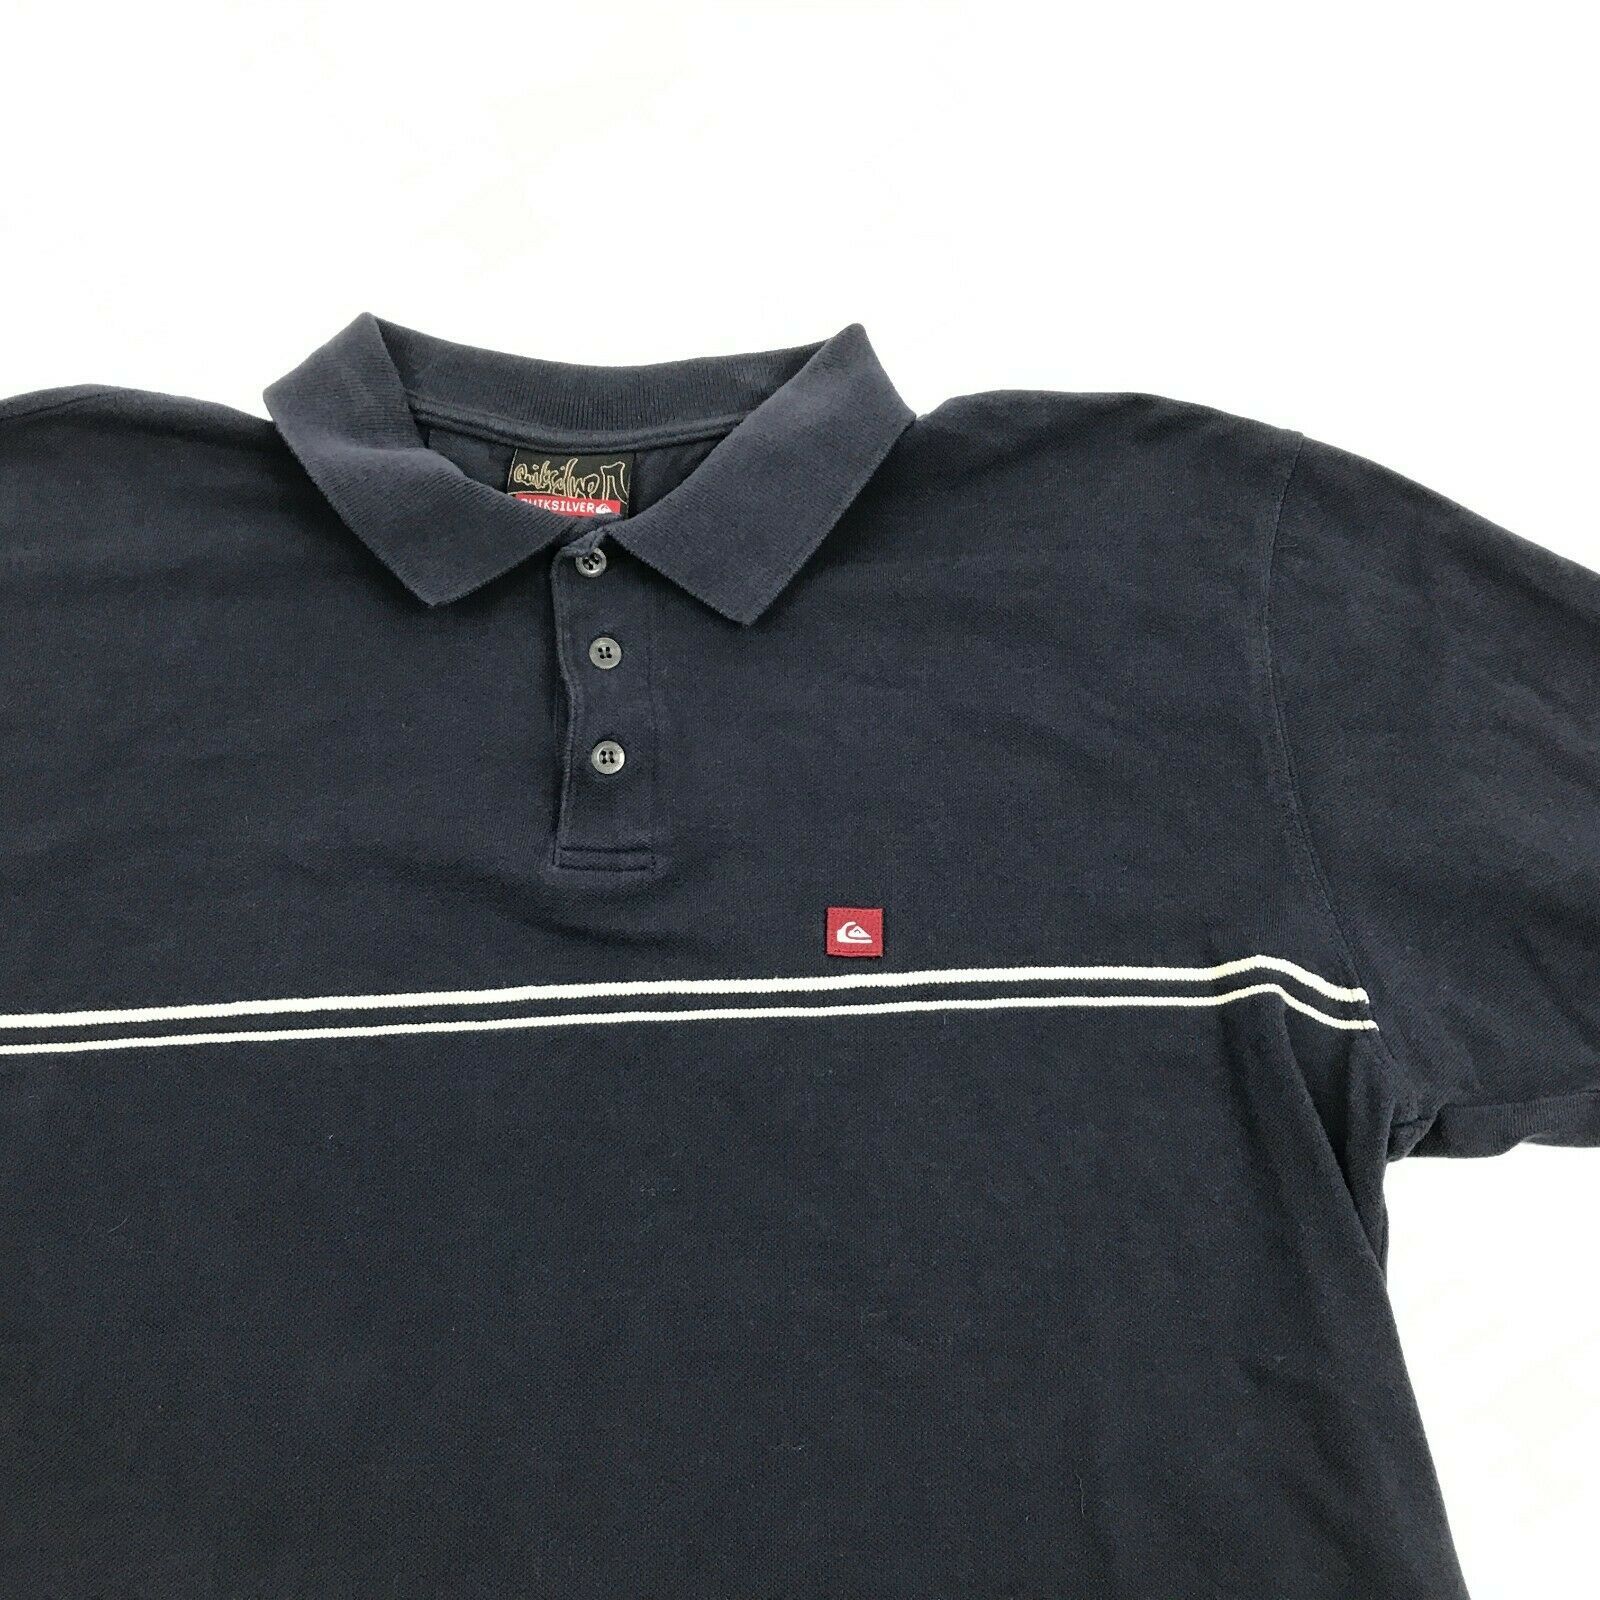 VINTAGE Quicksilver Polo Size Extra Large XL Navy Blue Short Sleeve ...